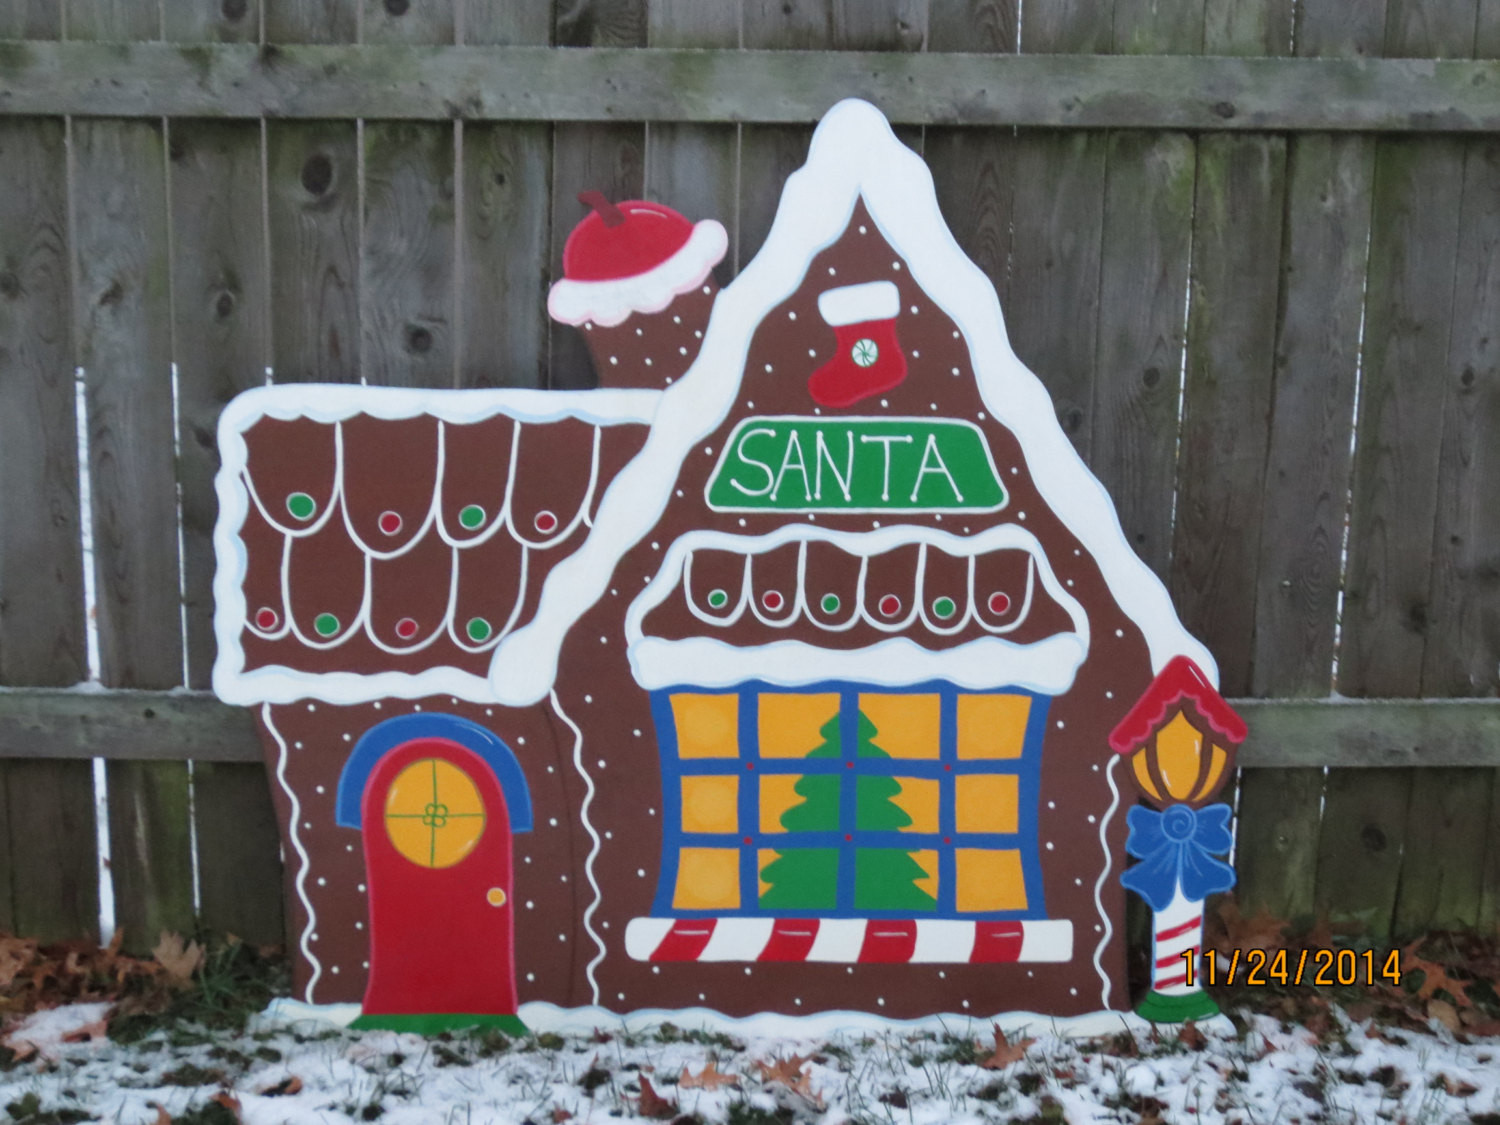 Gingerbread Outdoor Christmas Decorations
 Christmas Santa s Gingerbread House Wood Outdoor Village